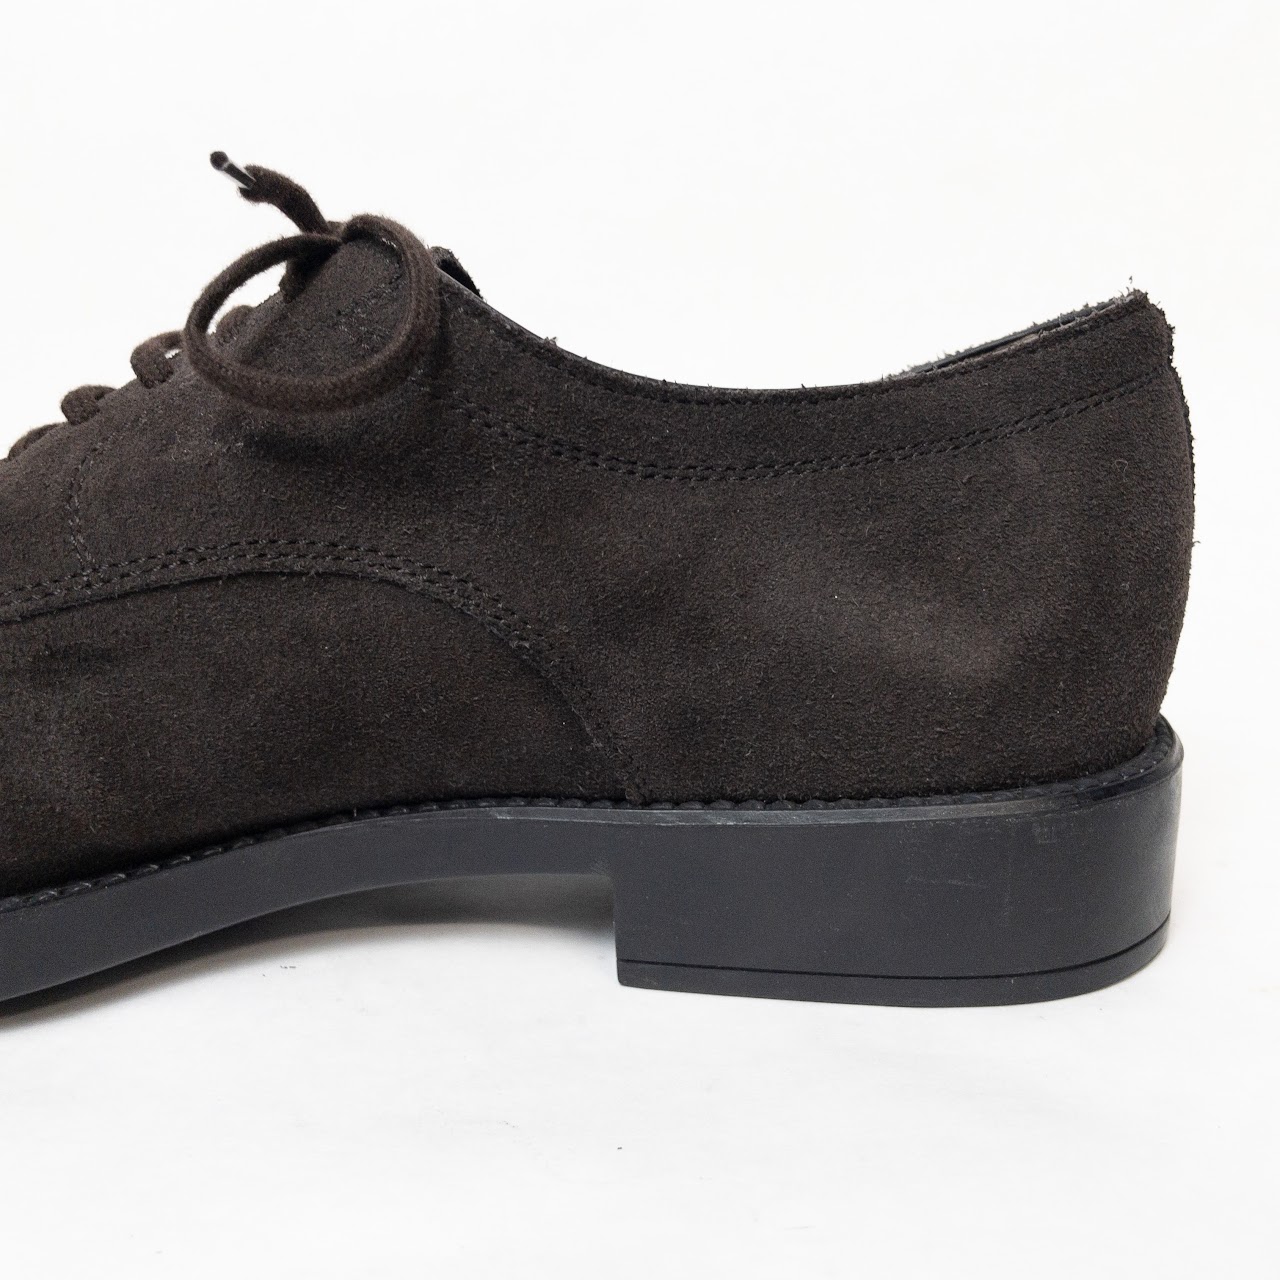 Tod's Suede Derby Shoes